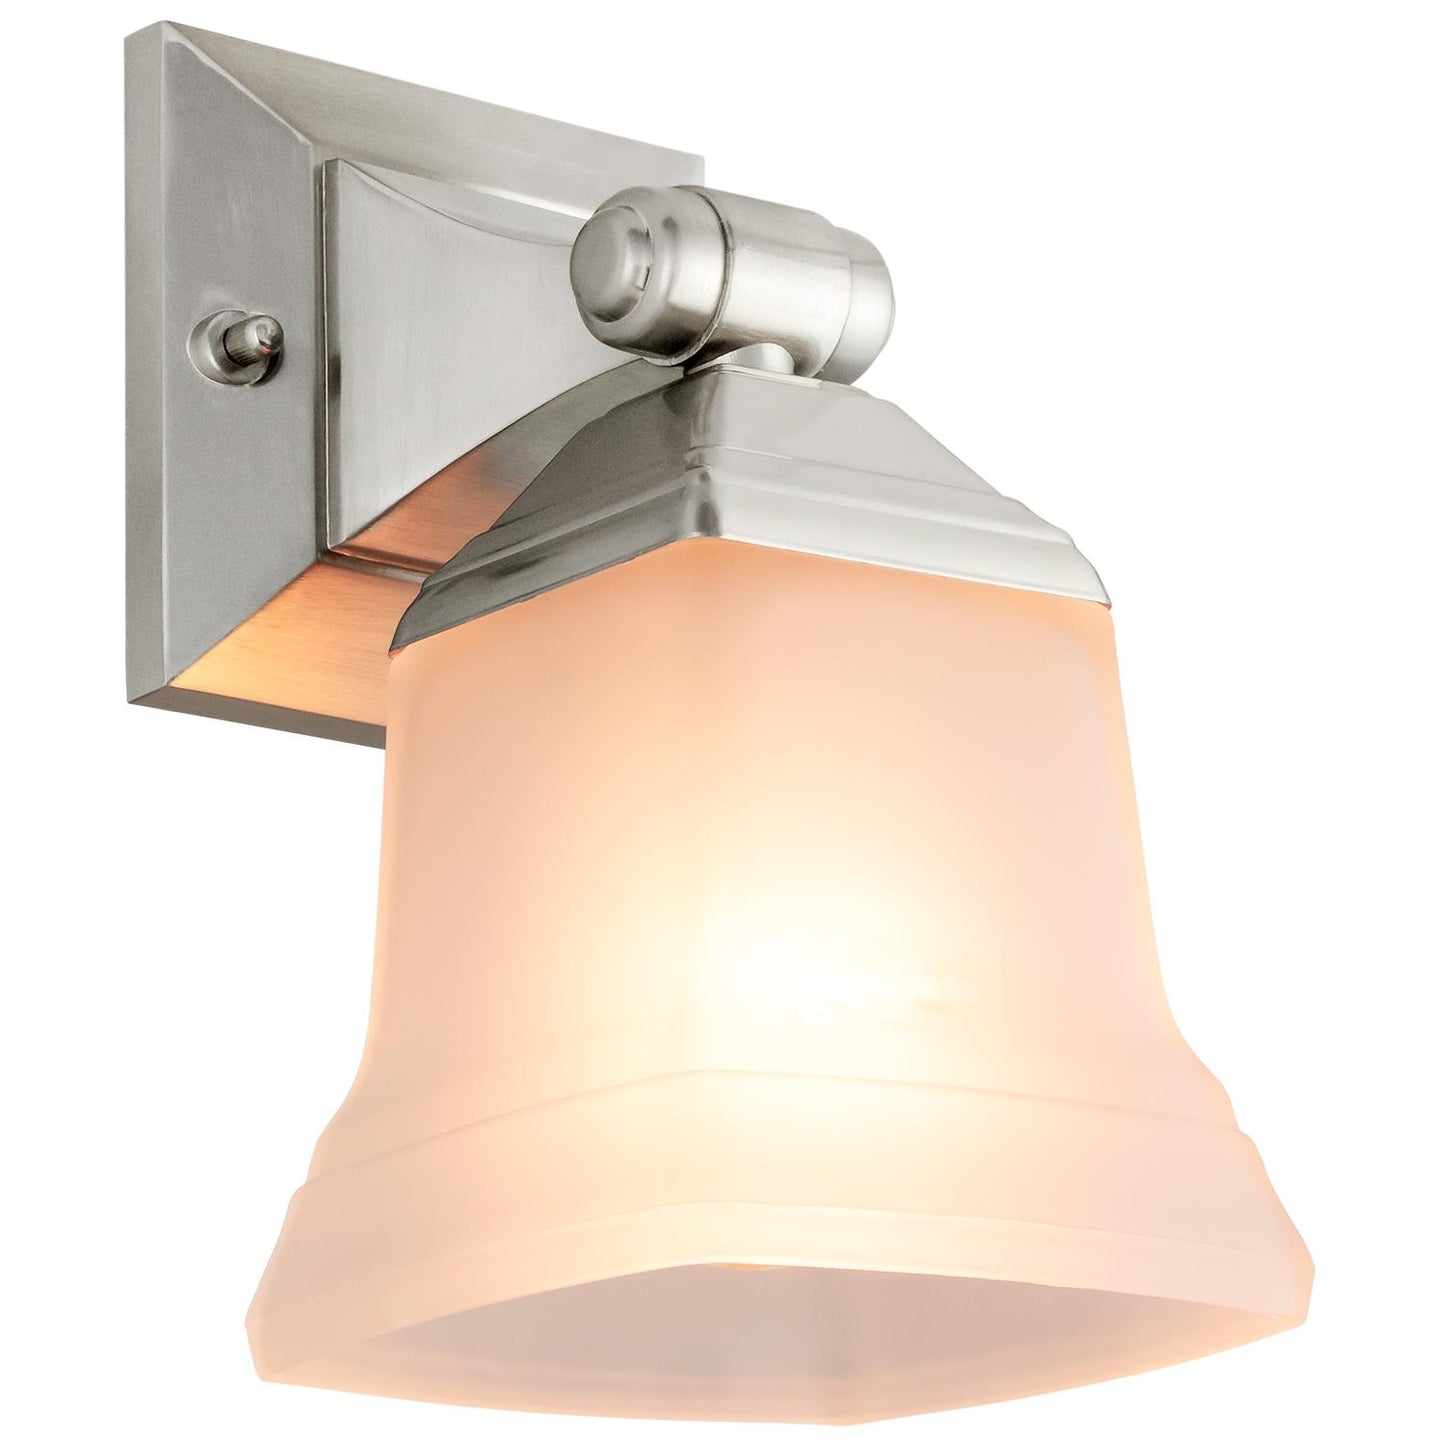 Sunlite 46061-SU Vanity Fixture One Light 5 Inch, Bell Shaped Frosted Glass, Brushed Nickel Finish